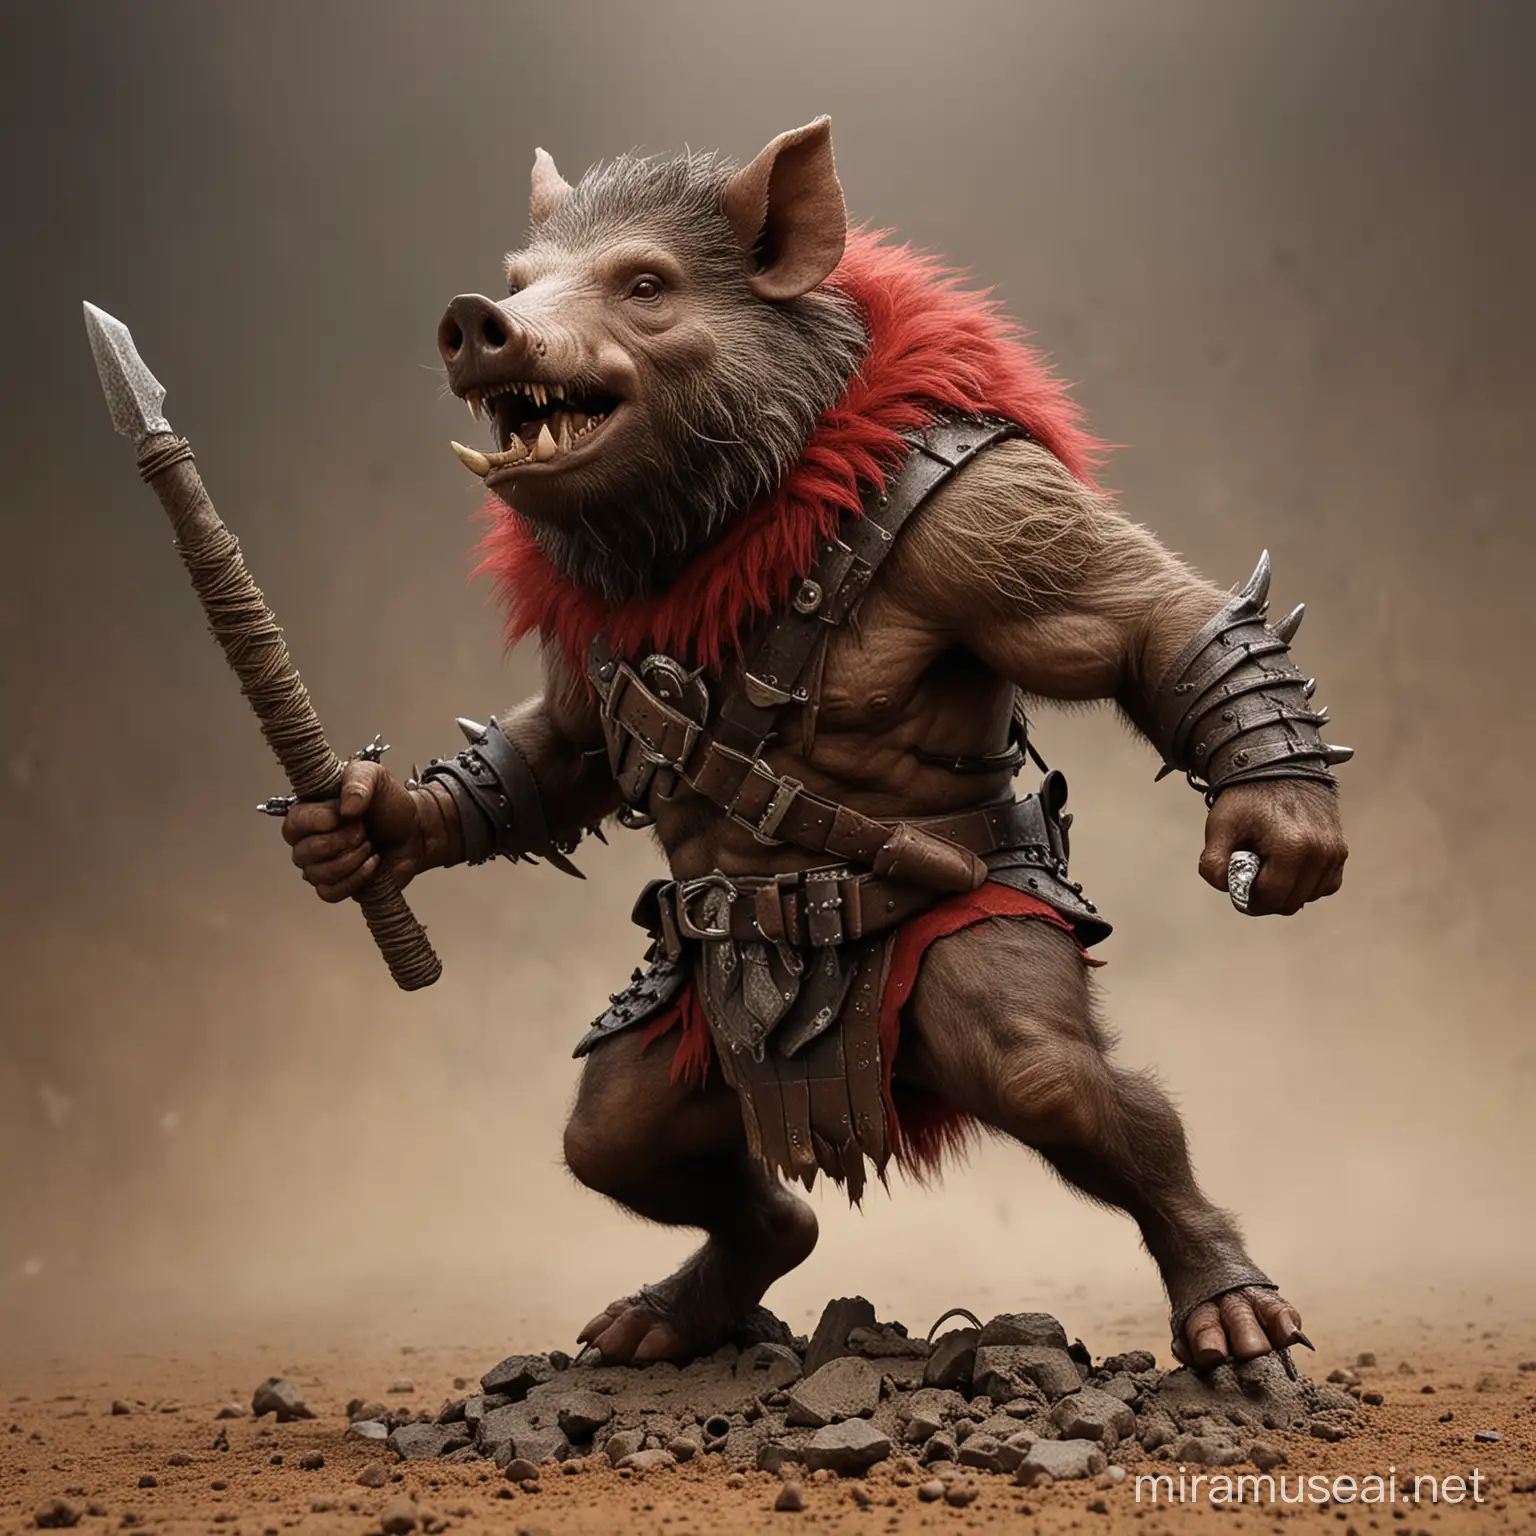 Boar warrior swinging a war-club
appreance- boar humanoid/tusks// full body/noir brown-red fur/shaggy/-unkept fur/ furious/ bipedeal /studded-war club/bloody/
background- battle field/trenches/ dead soldiers/ dirt/ barded-wire